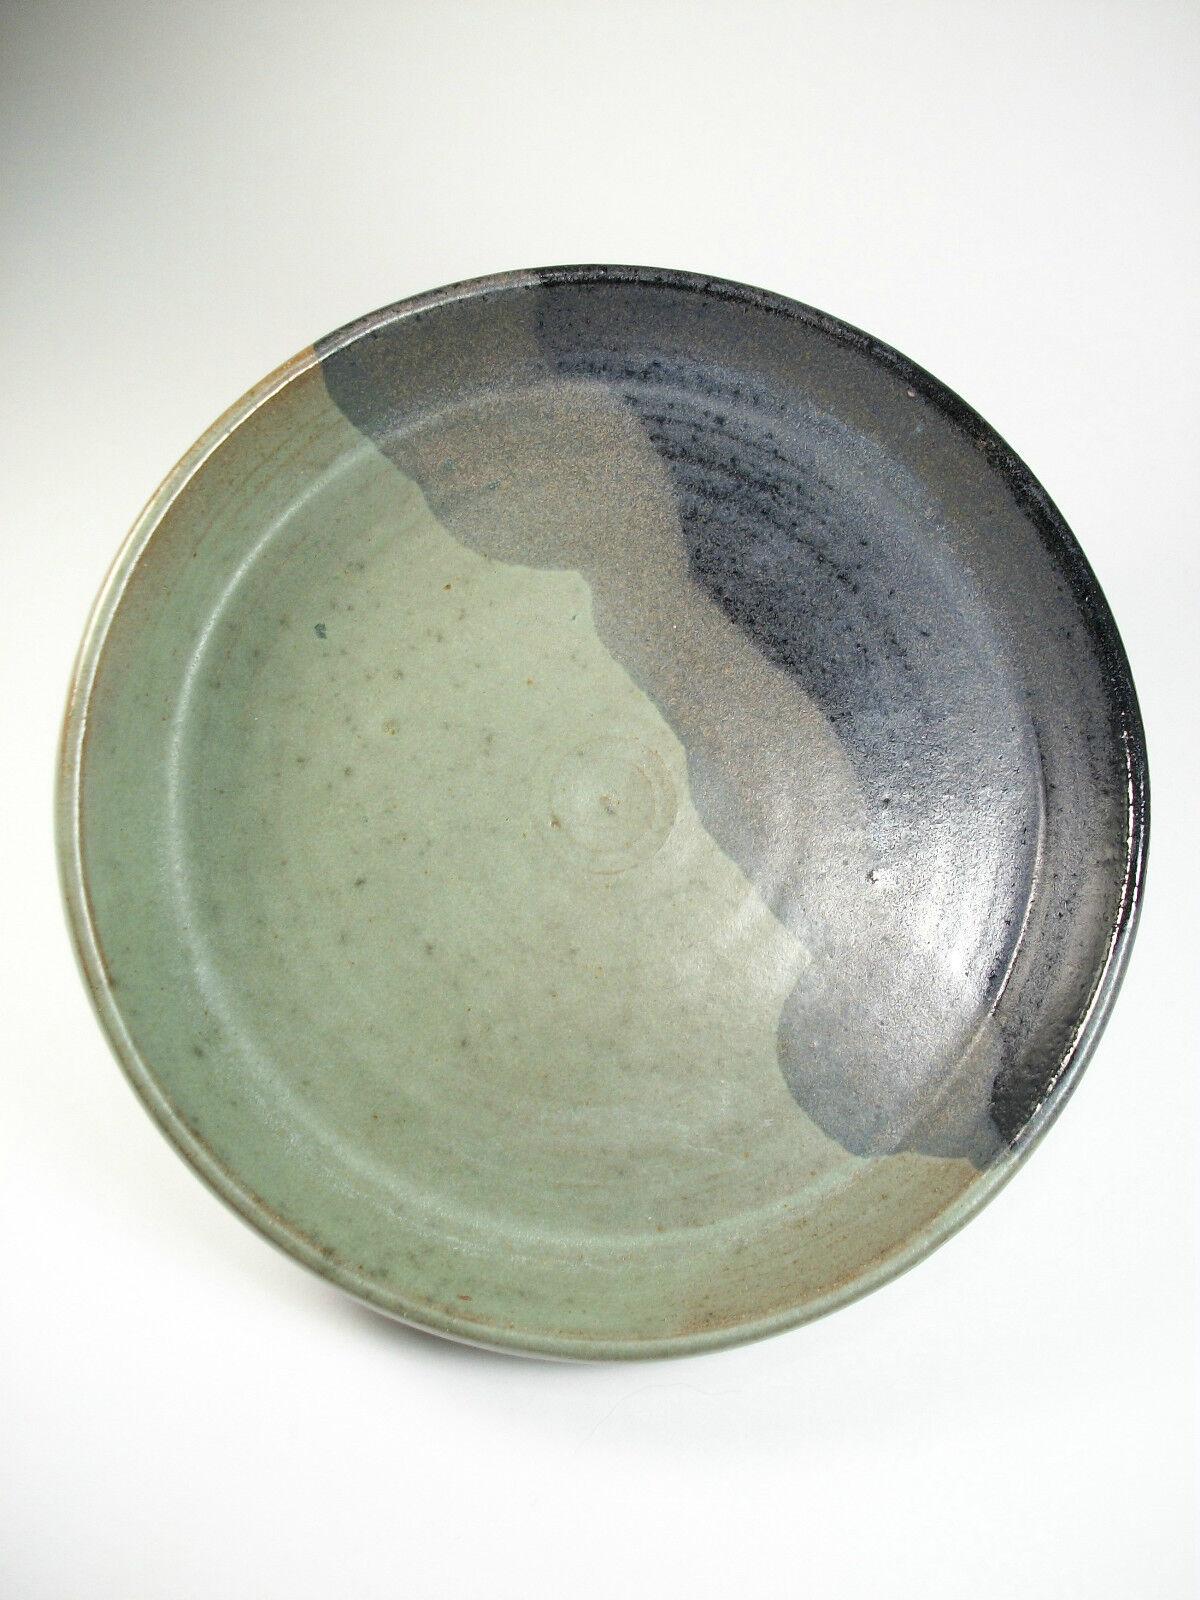 Mid-Century Modern Judy Phillips - Vintage Studio Pottery Stoneware Charger - Canada - Mid-20th C For Sale